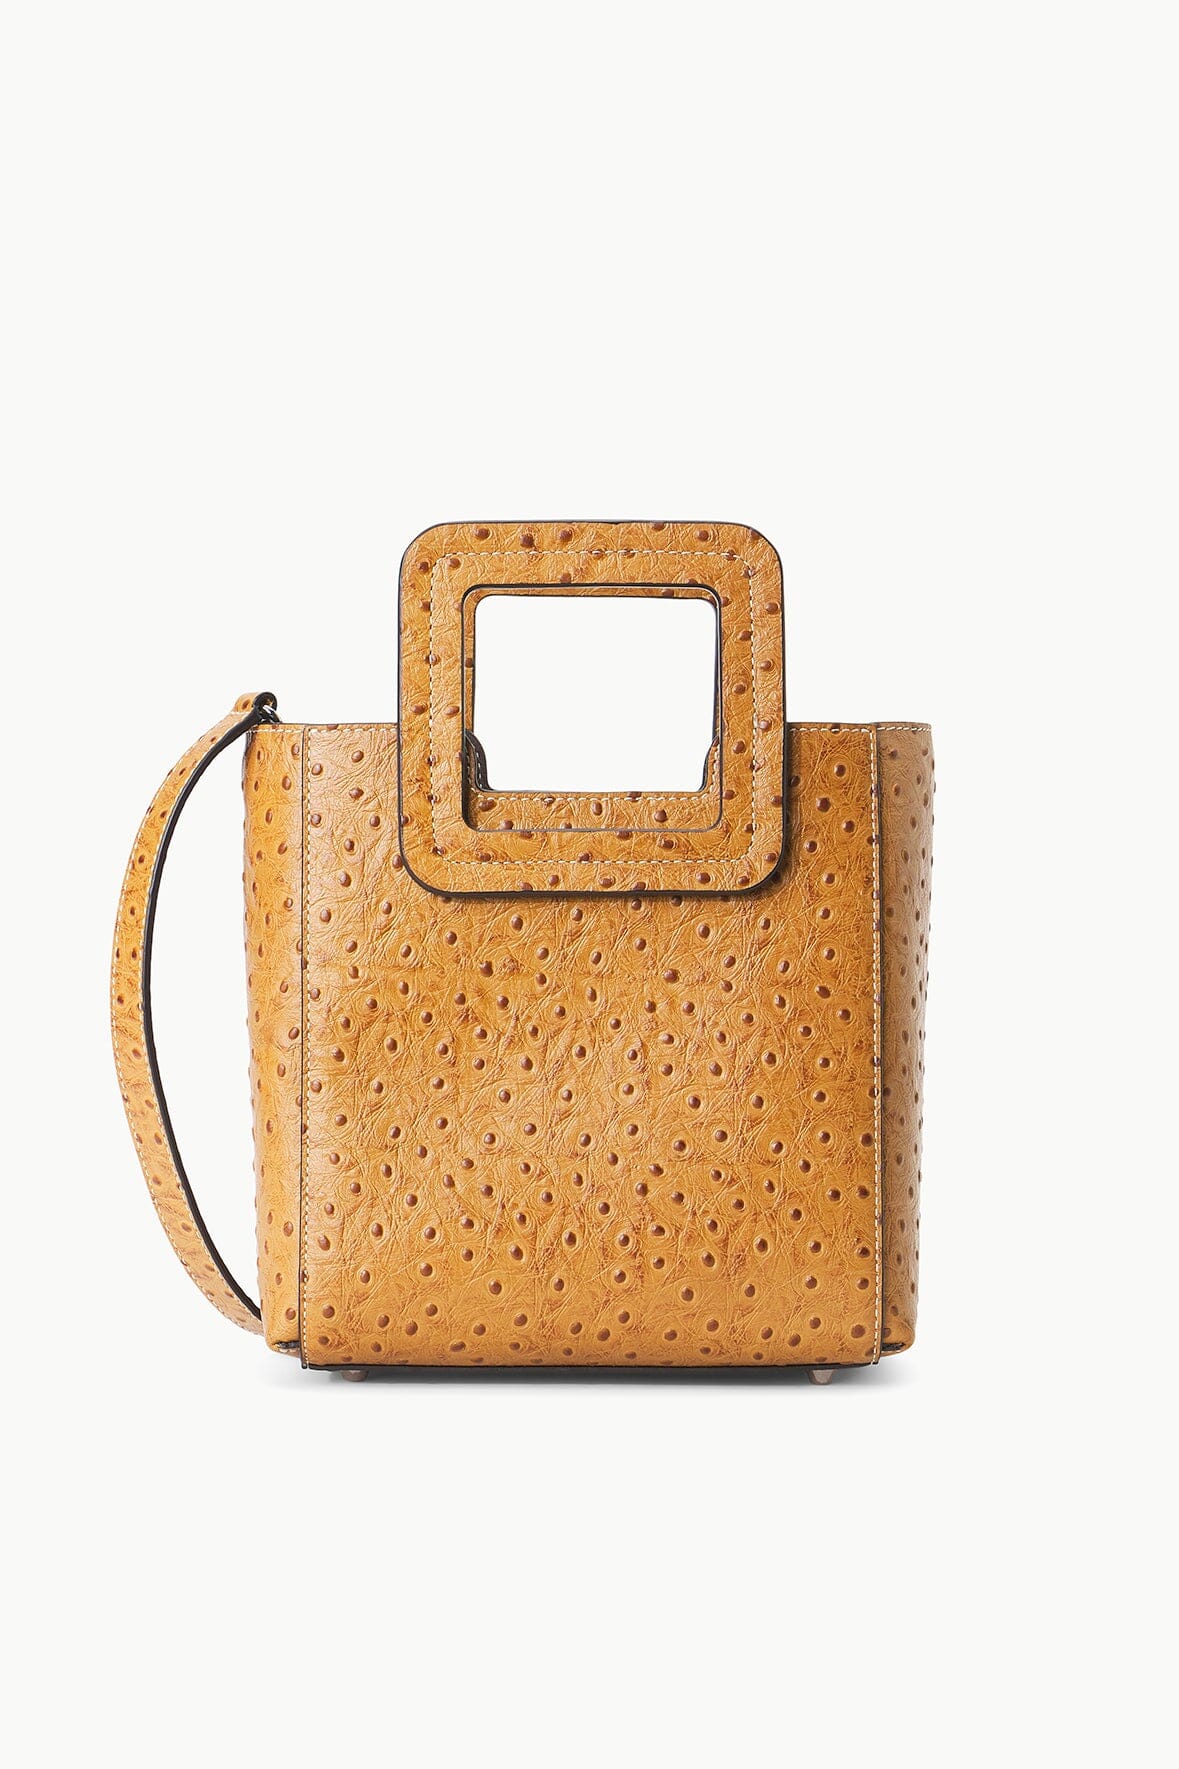 MINI SHIRLEY LEATHER BAG | WALNUT OSTRICH EMBOSSED